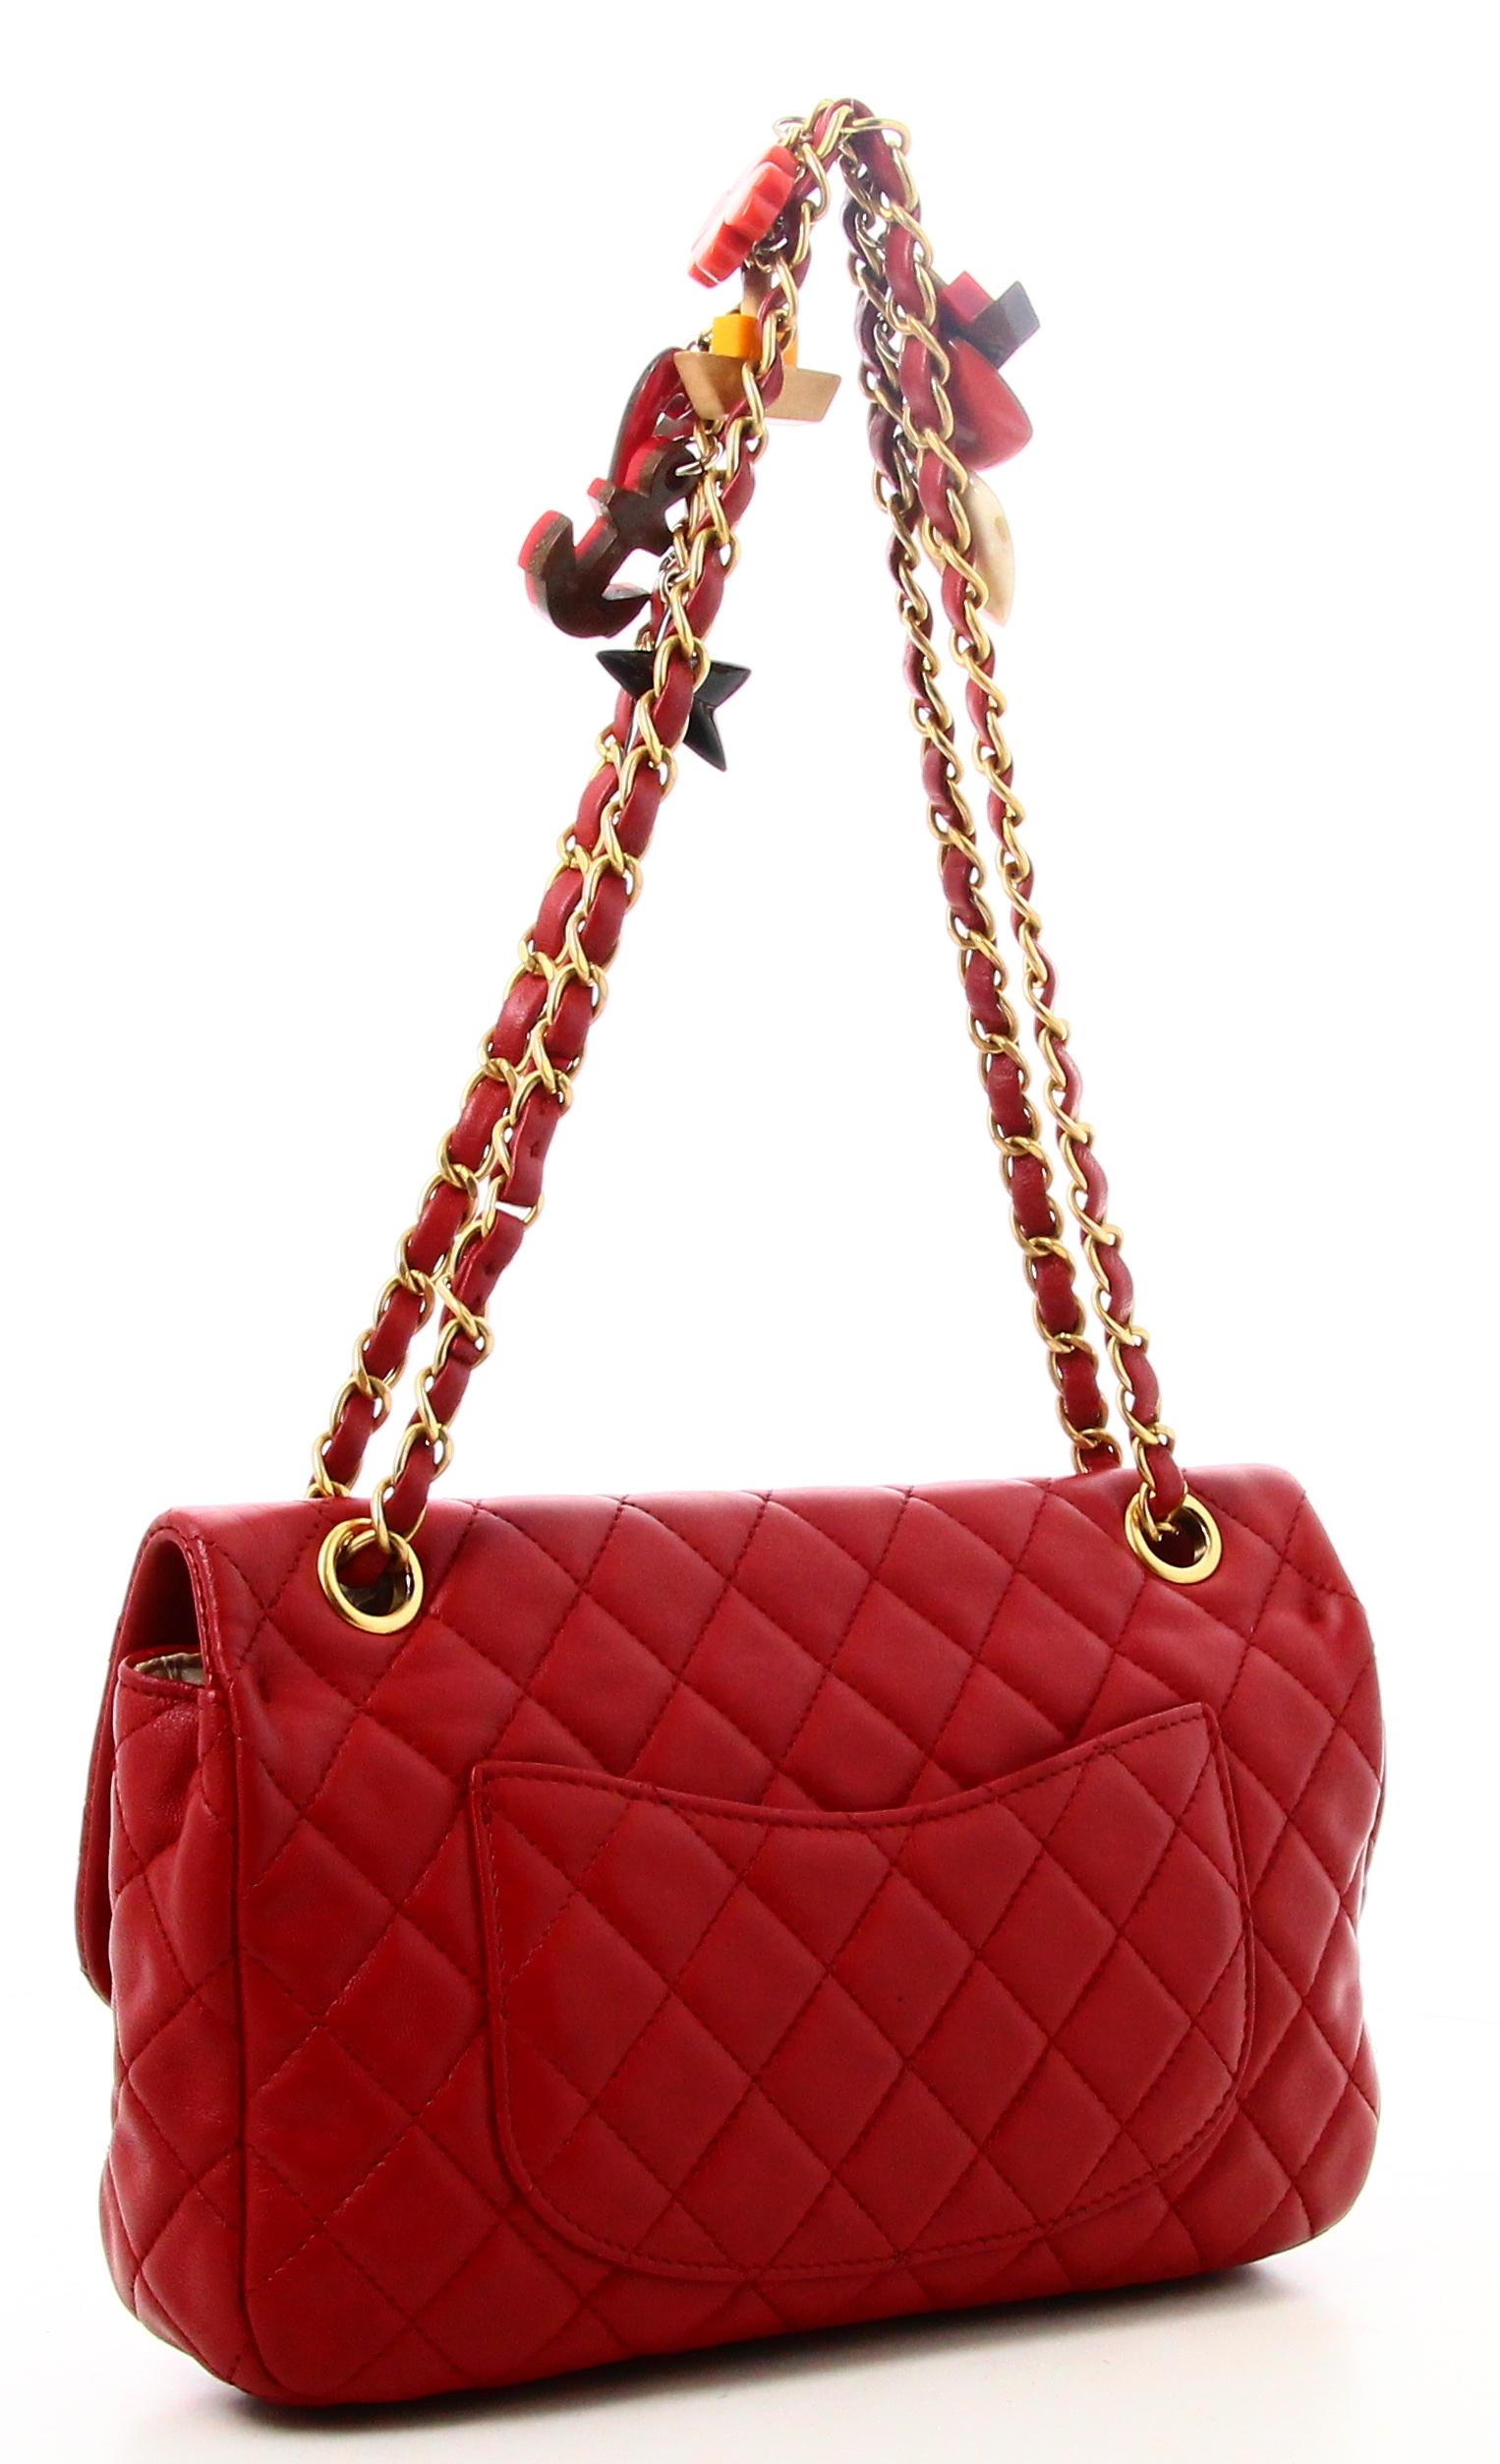 Women's 2010 Chanel Timeless Handbag Red Quilted Leather For Sale